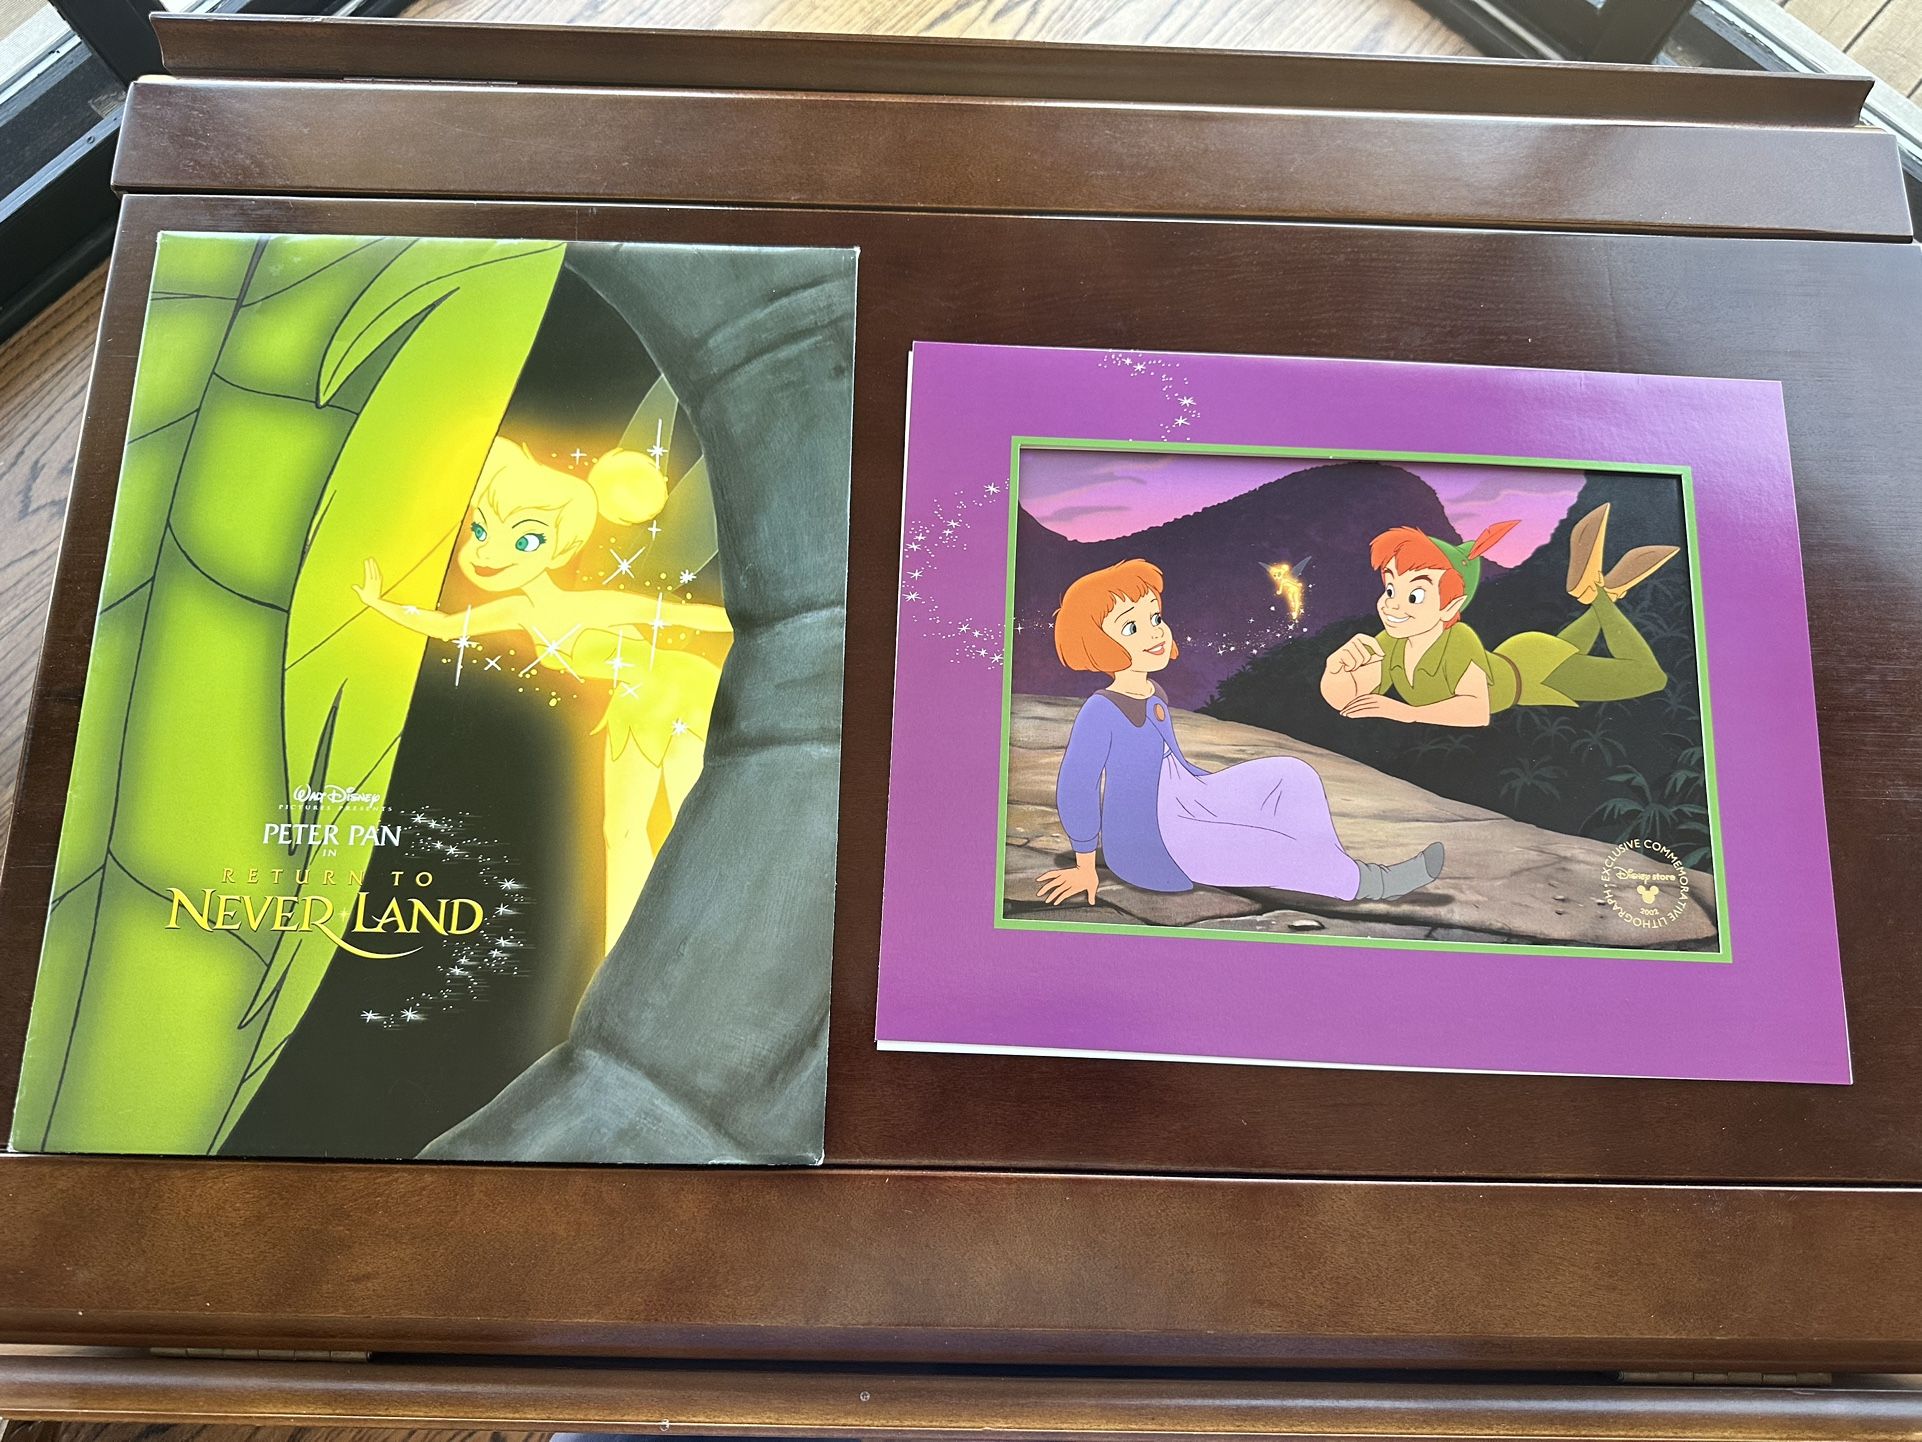 DISNEY PETER PAN RETURN TO NEVER LAND EXCLUSIVE LITHOGRAPH PICTURE 11 X 14 